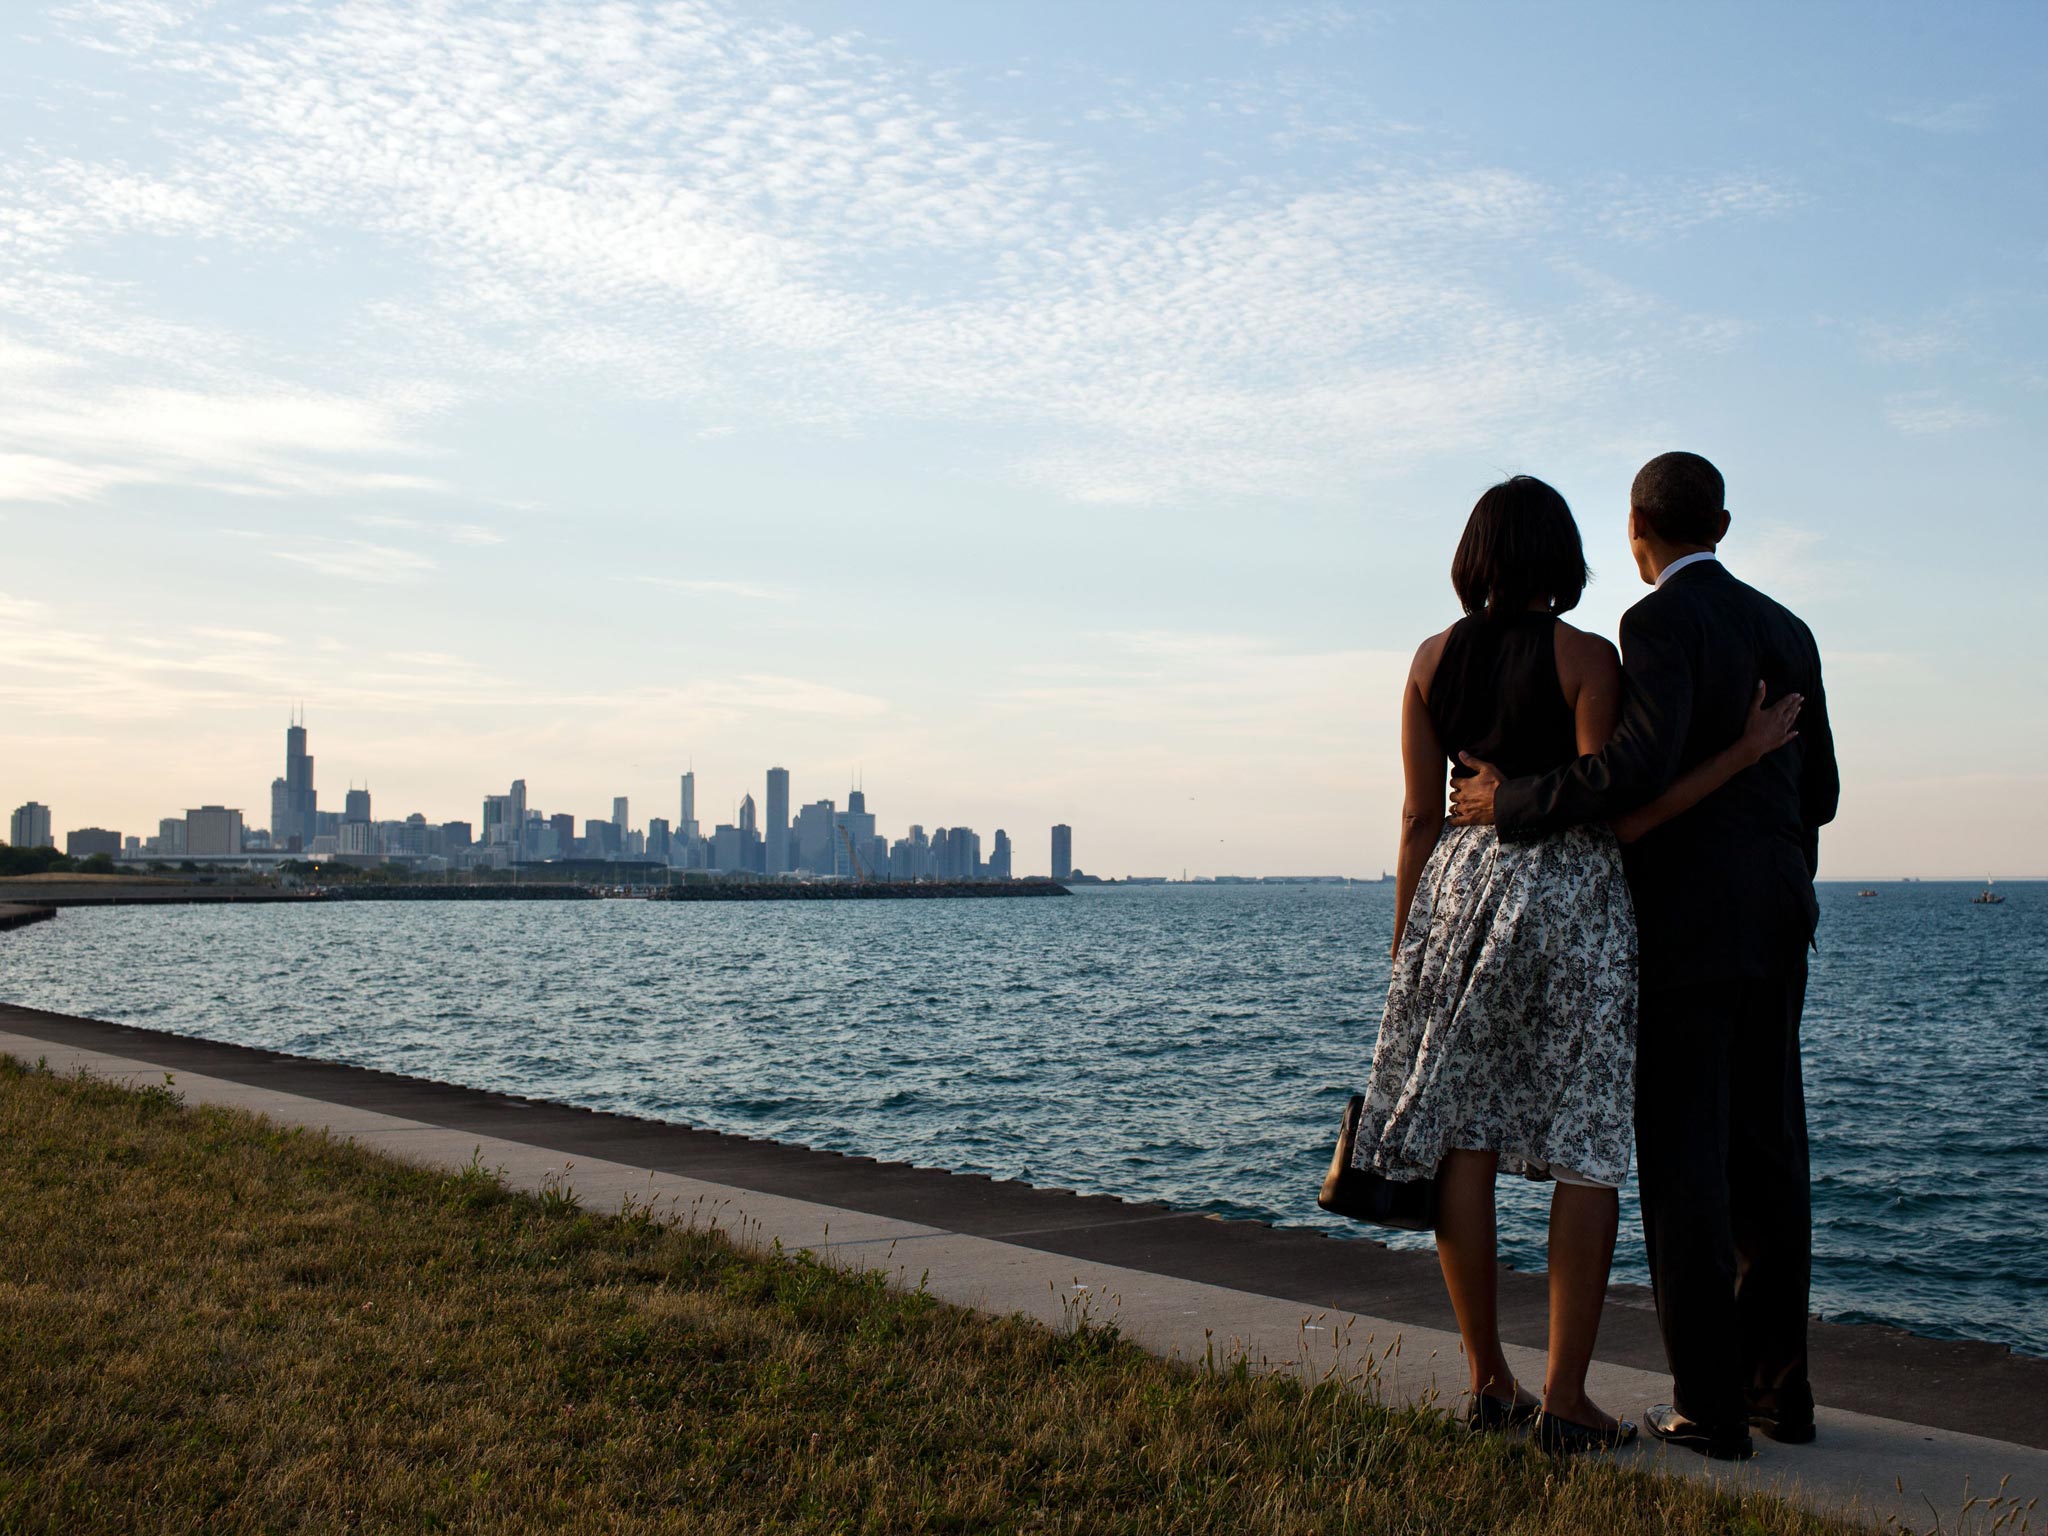 Barack and Michelle Obama stand on the edge of Lake Michigan to view the skyline of their home town Chicago